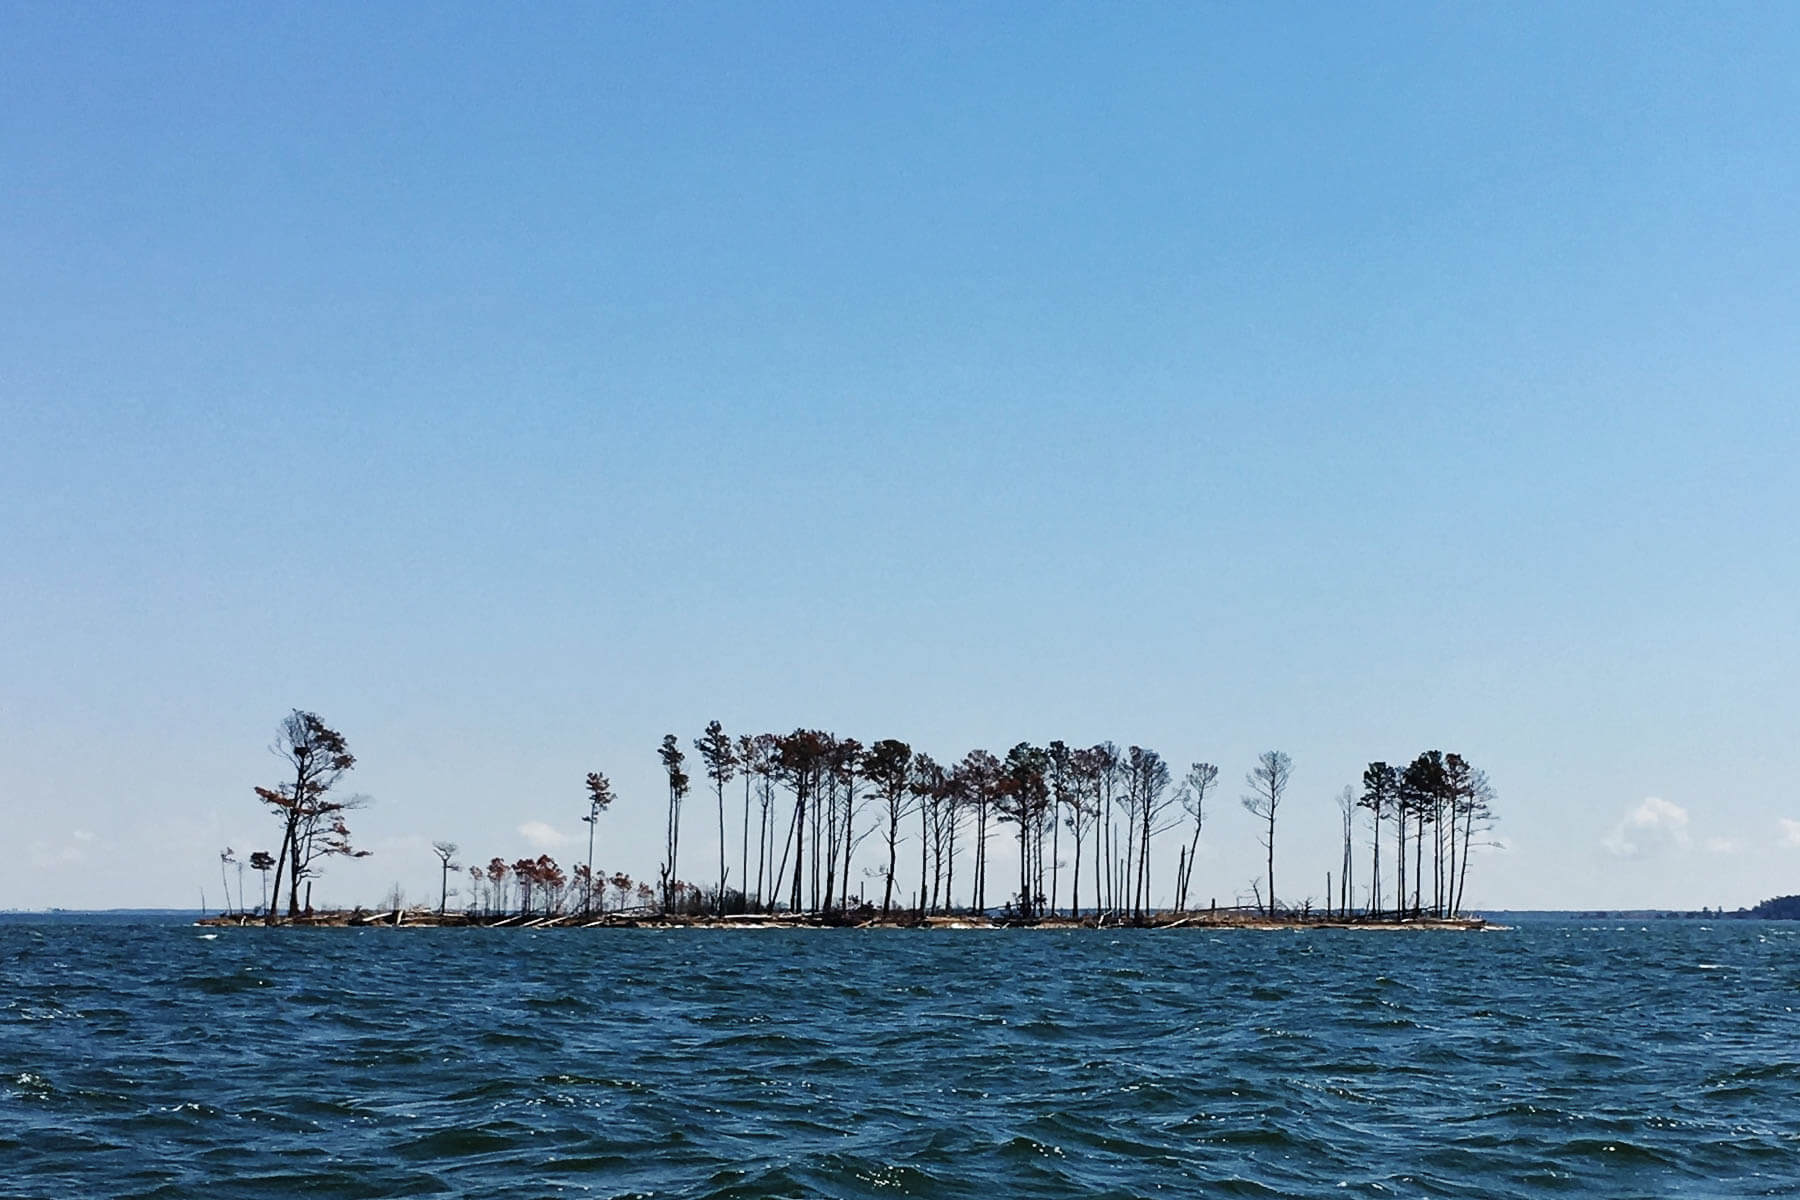 Several trees on the horizon surrounded by water